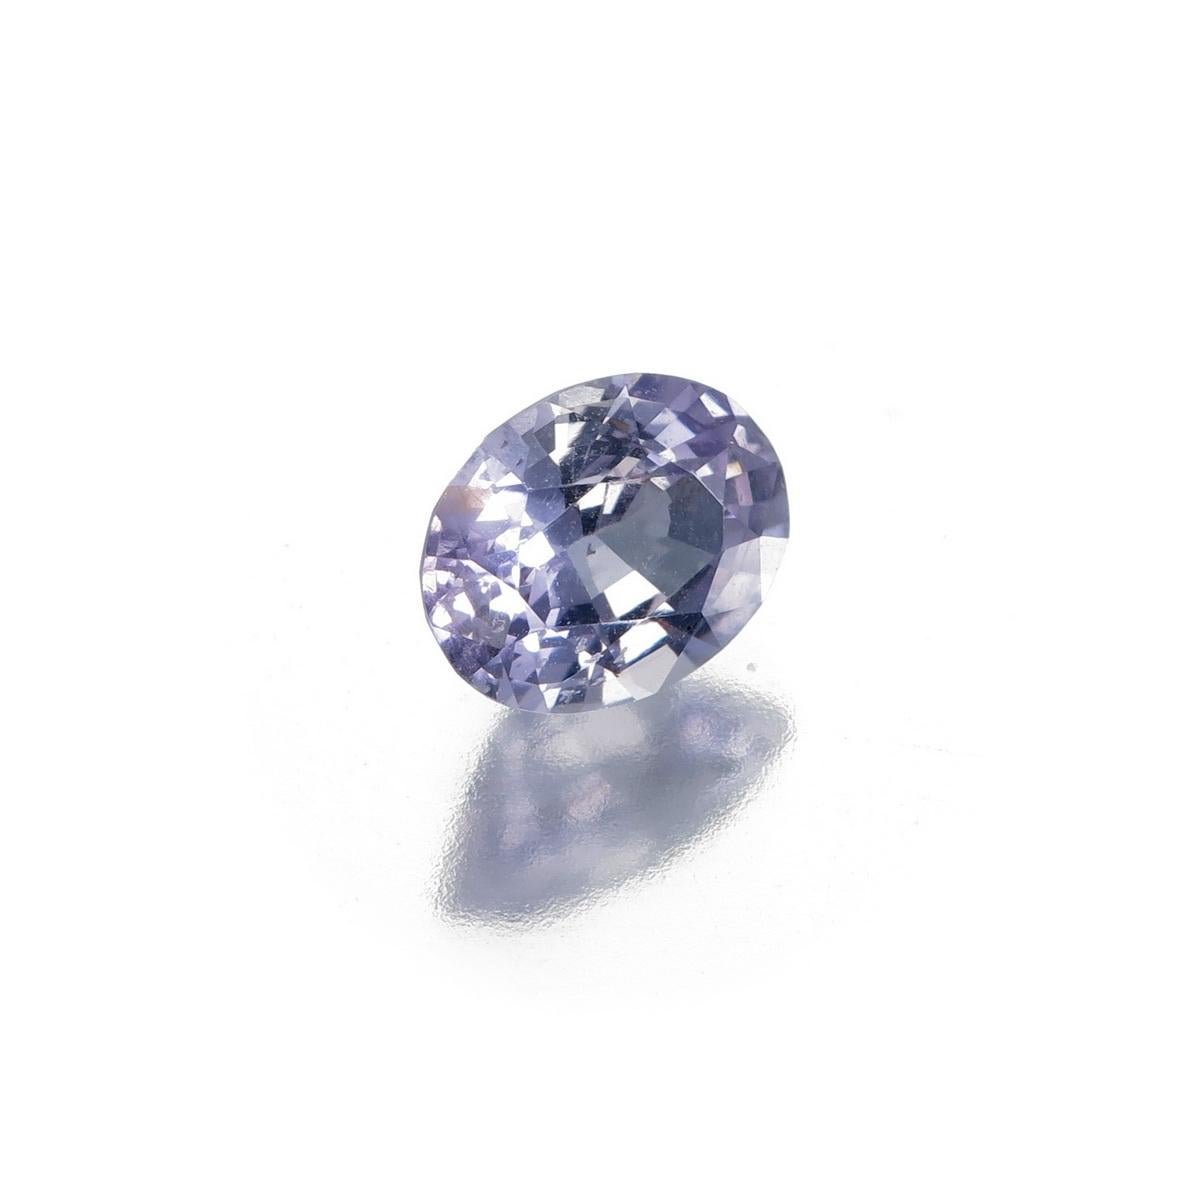 Oval Cut 1.67 Carat Natural Purple Spinel from Burma No heat For Sale